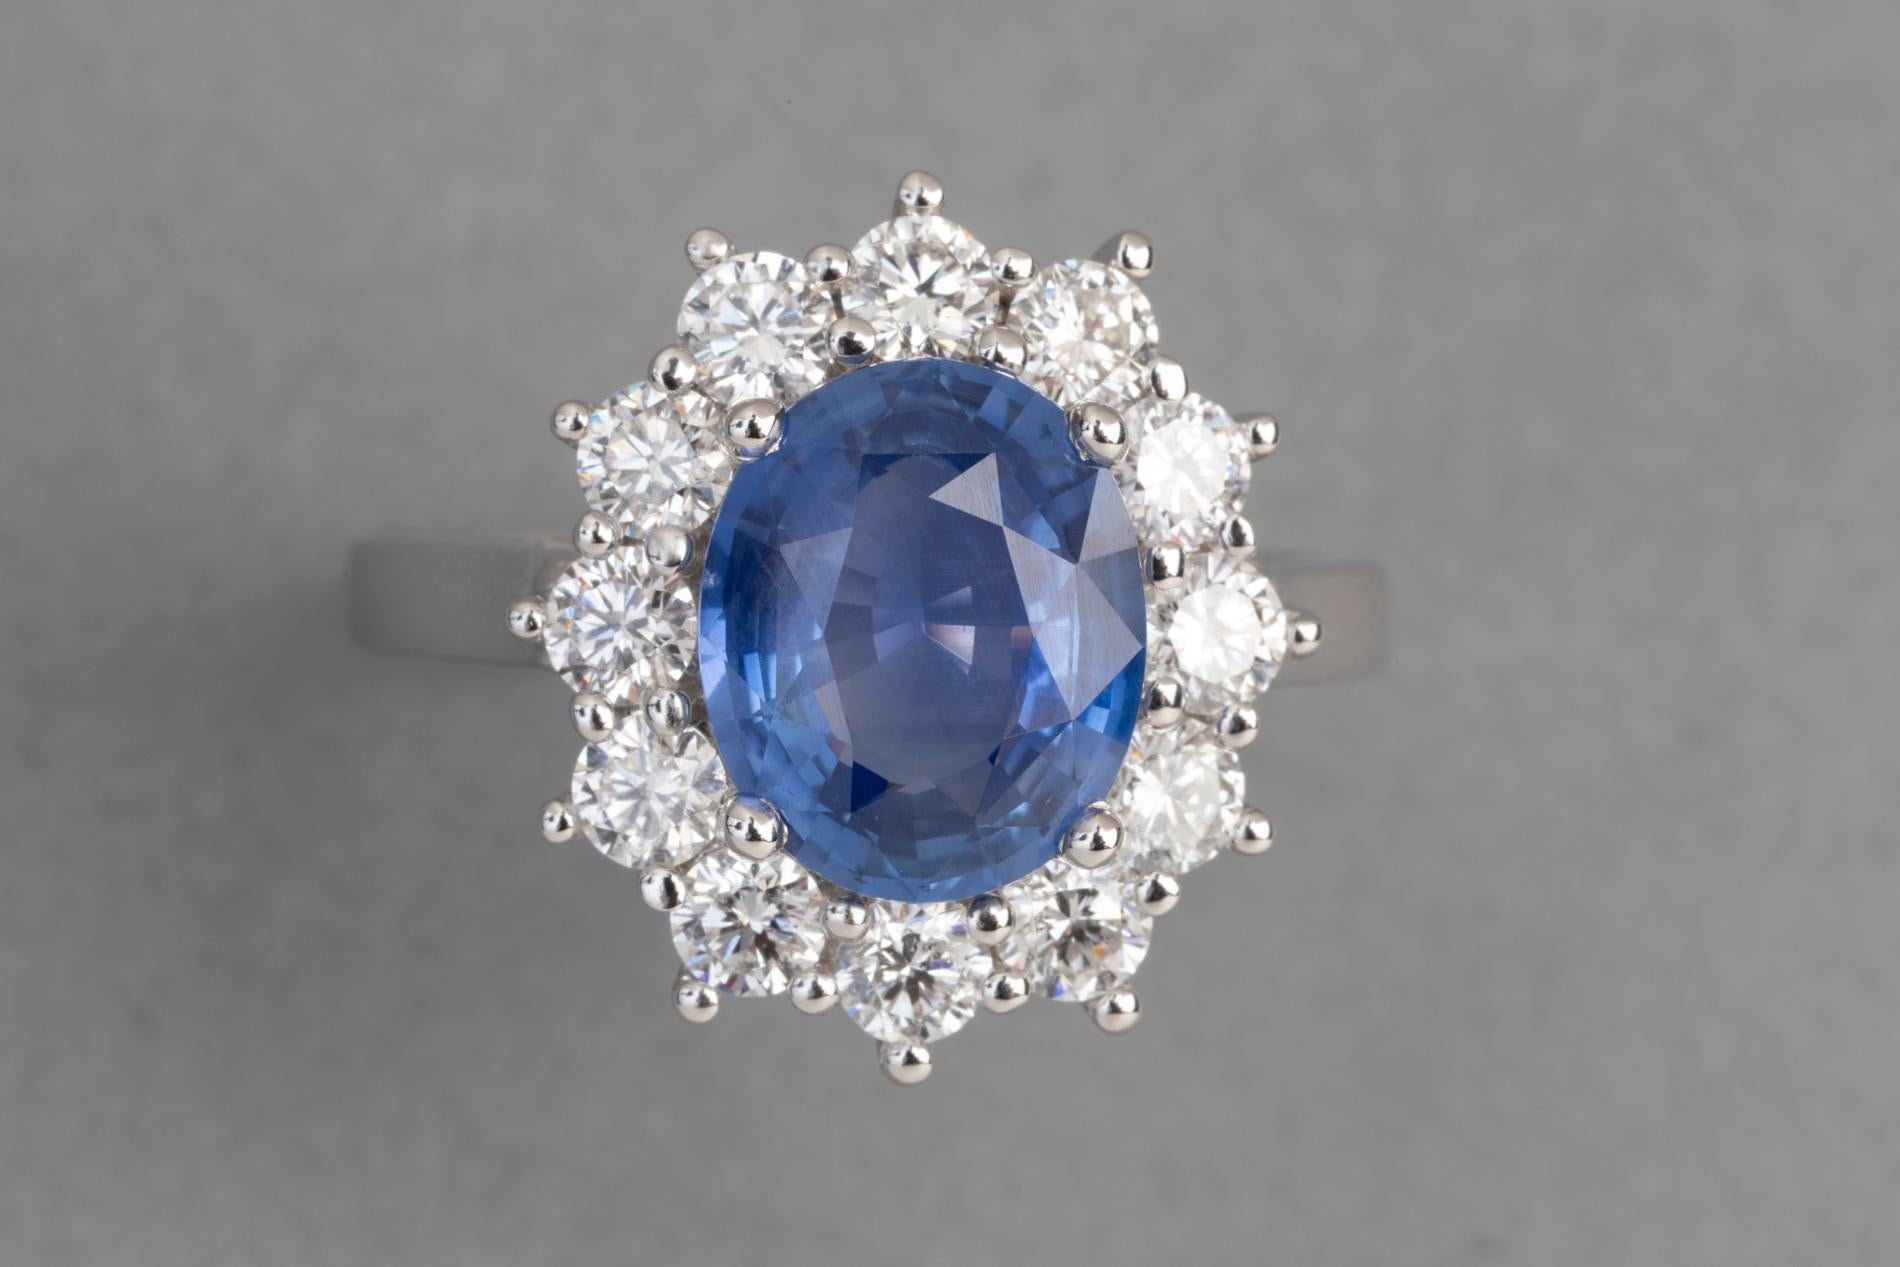 Certified 3.08 Carat Ceylan Sapphire and 1.19 Carats Diamonds Ring

Very Beautiful ring, made by me.  Mounted in White gold 750. 
 The Sapphire is high quality sapphire from Sri Lanka (Ceylan).  Certified no heat no treatment 
The weight of the